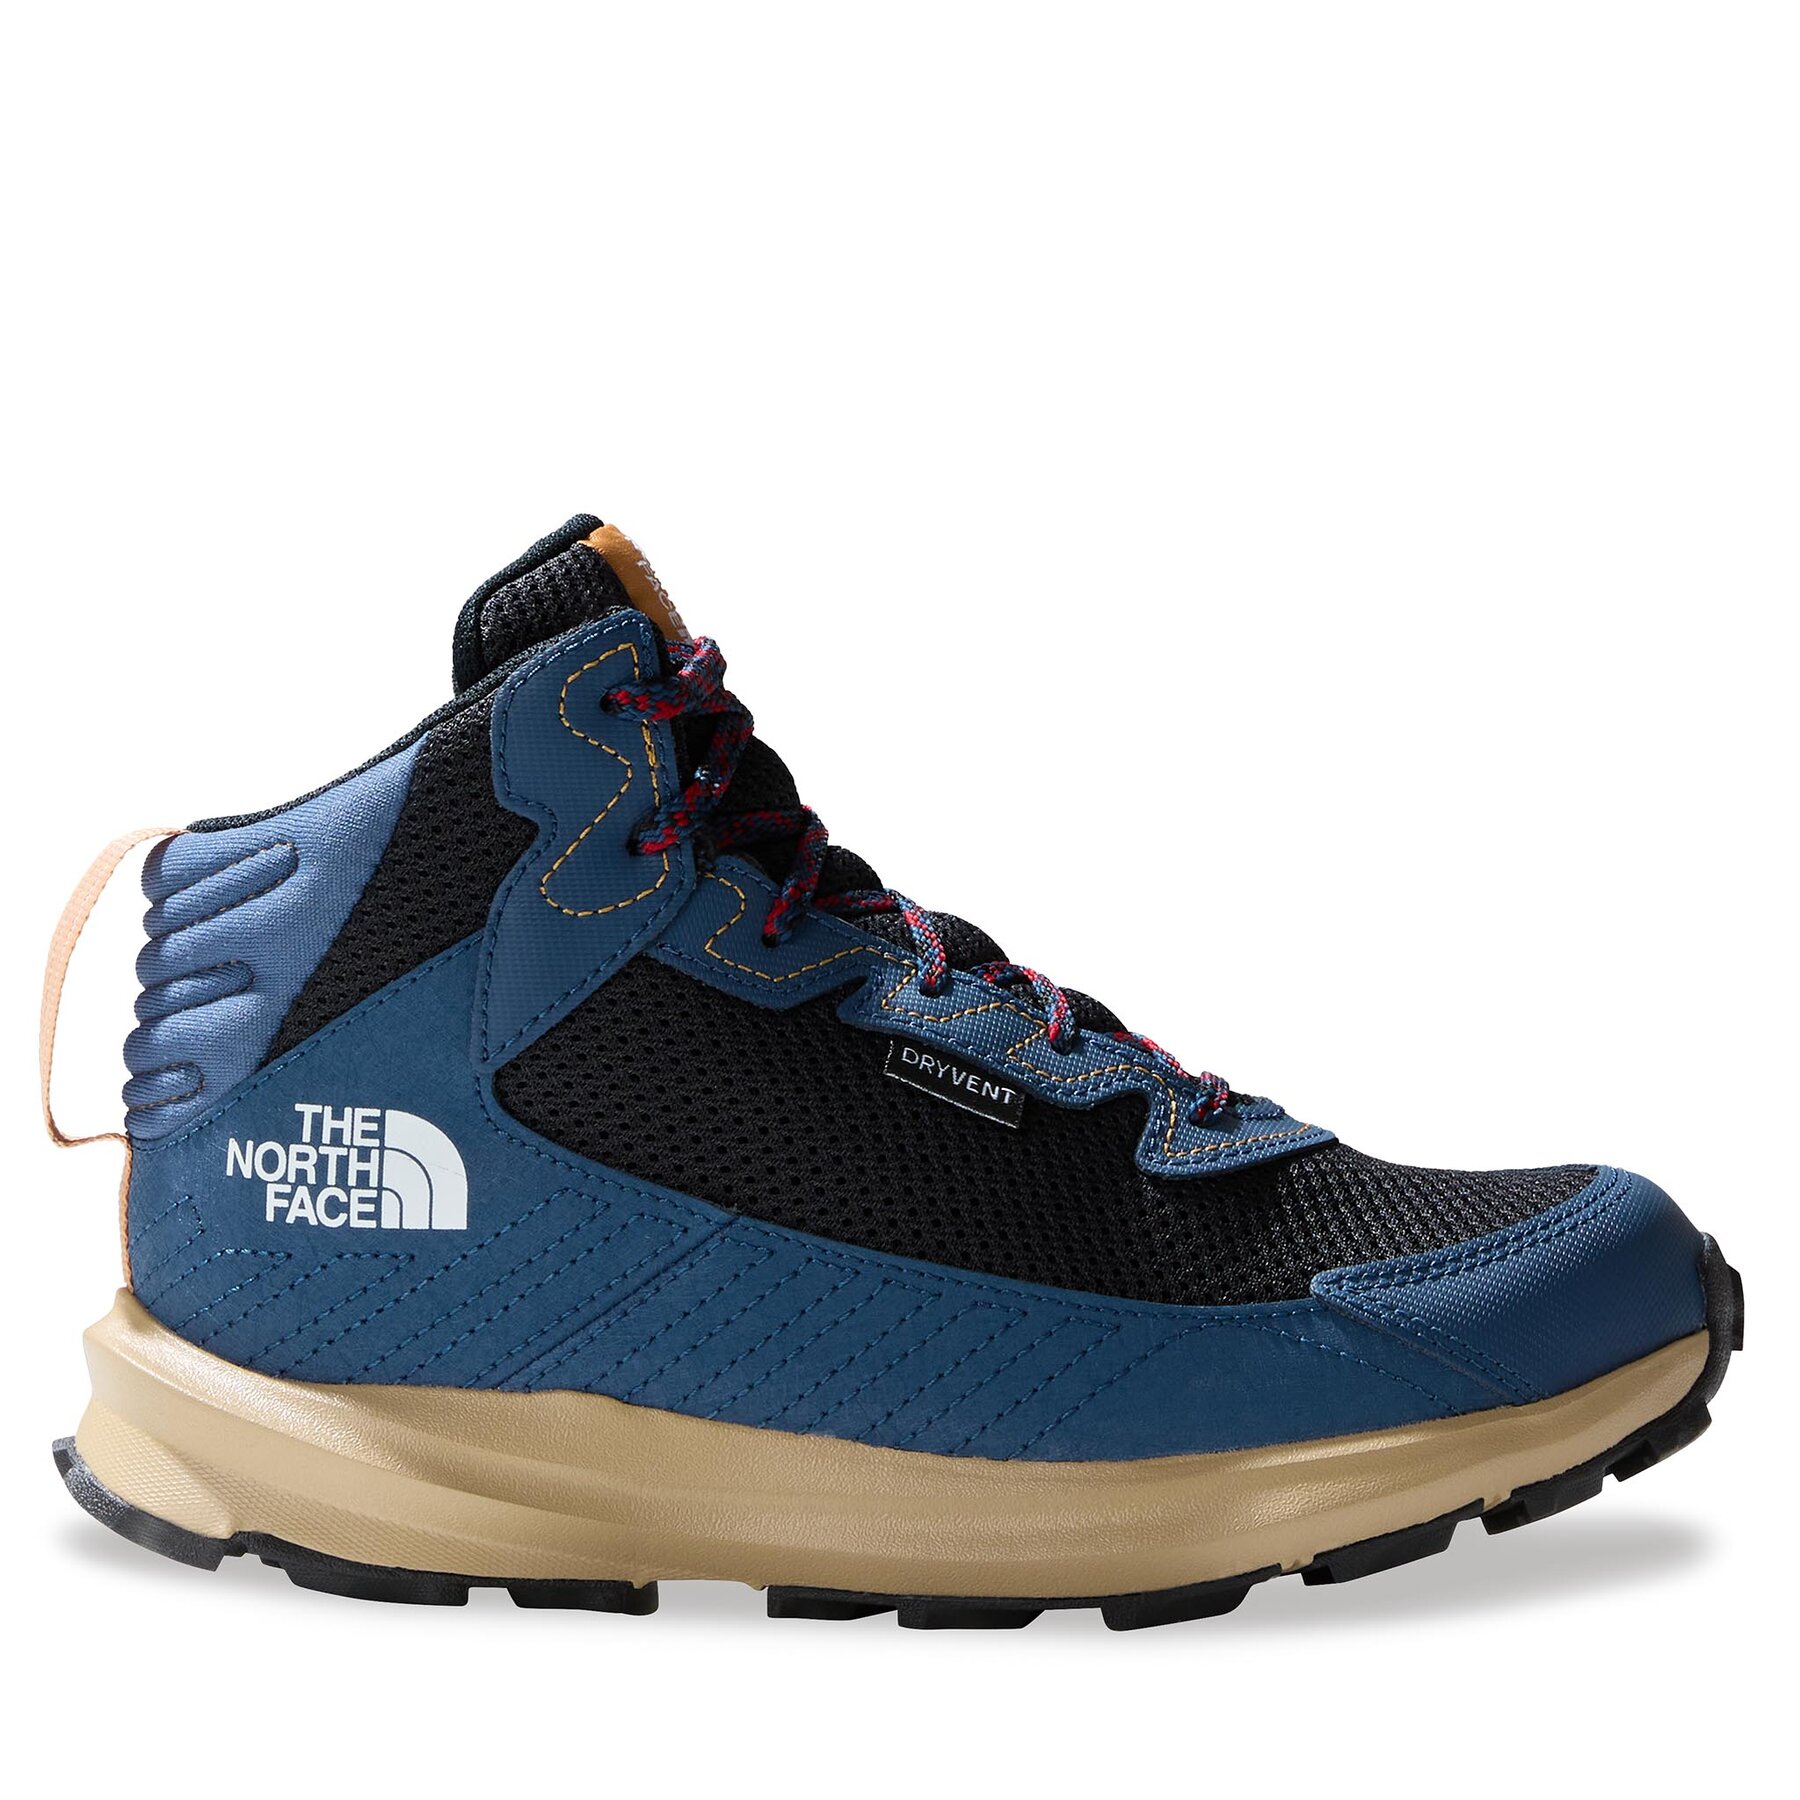 Trekkingschuhe The North Face Y Fastpack Hiker Mid WpNF0A7W5VVJY1 Shady Blue/Tnf White von The North Face